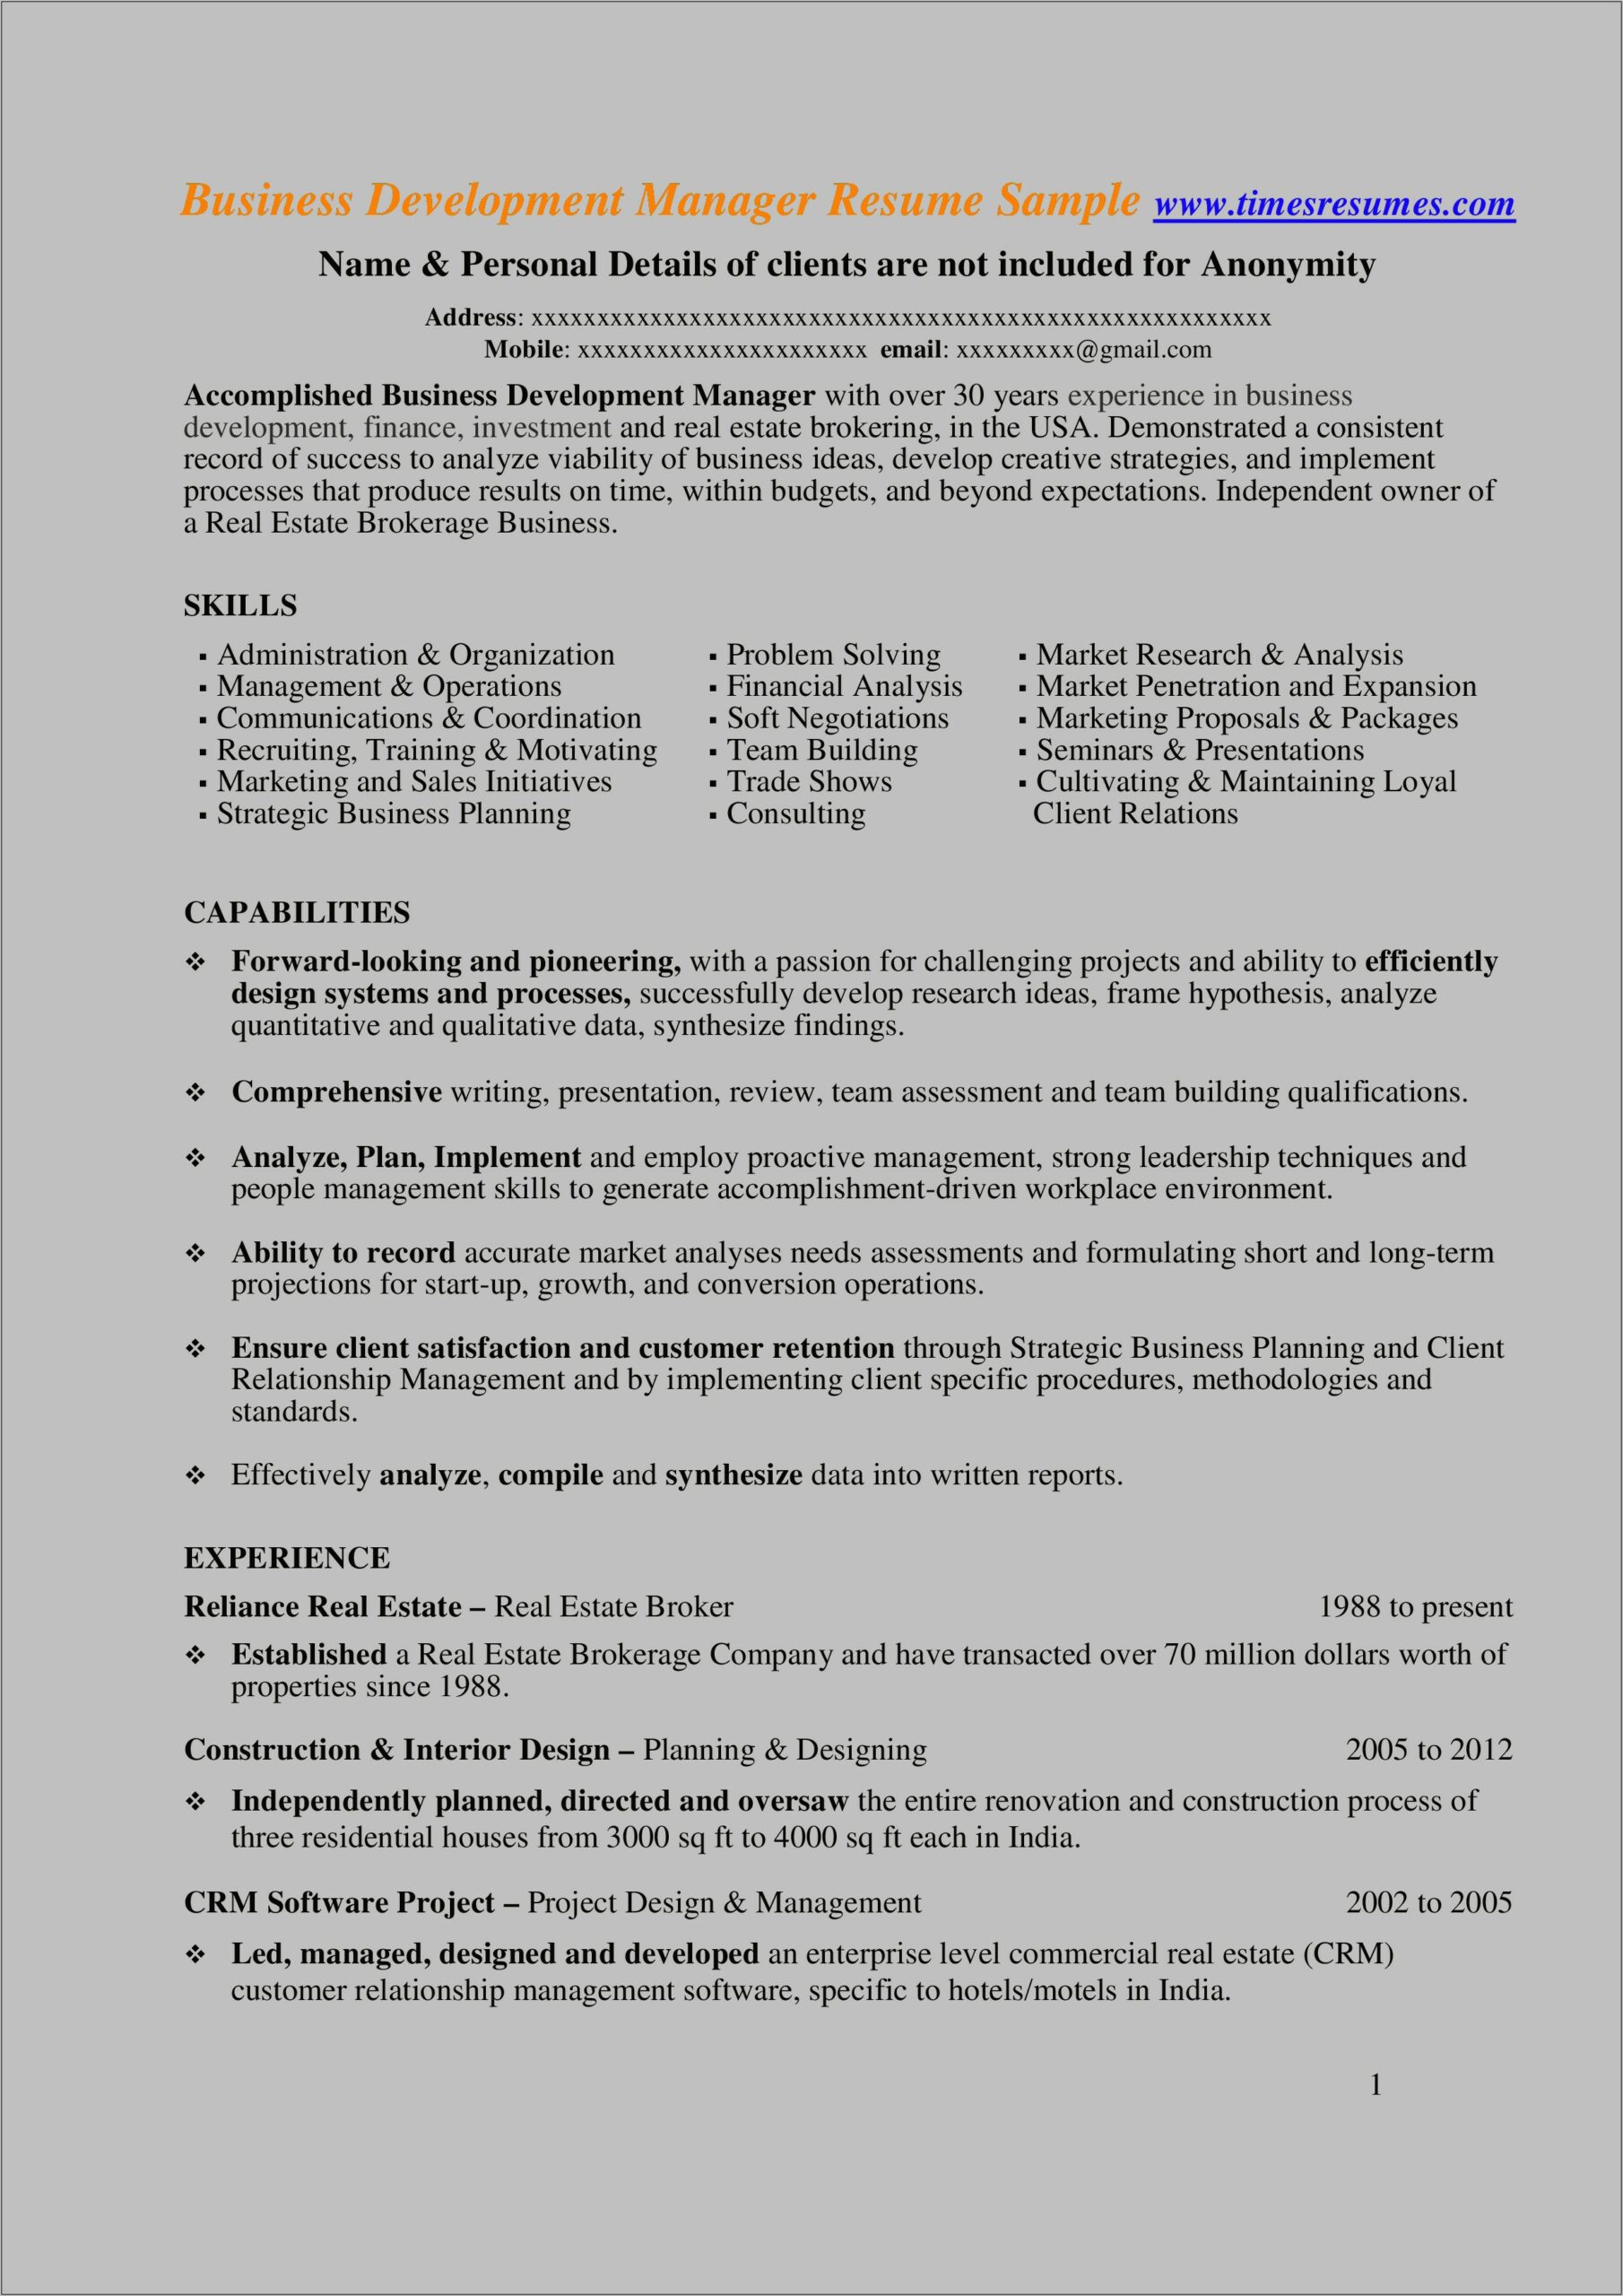 Computer Software Project Manager Resume